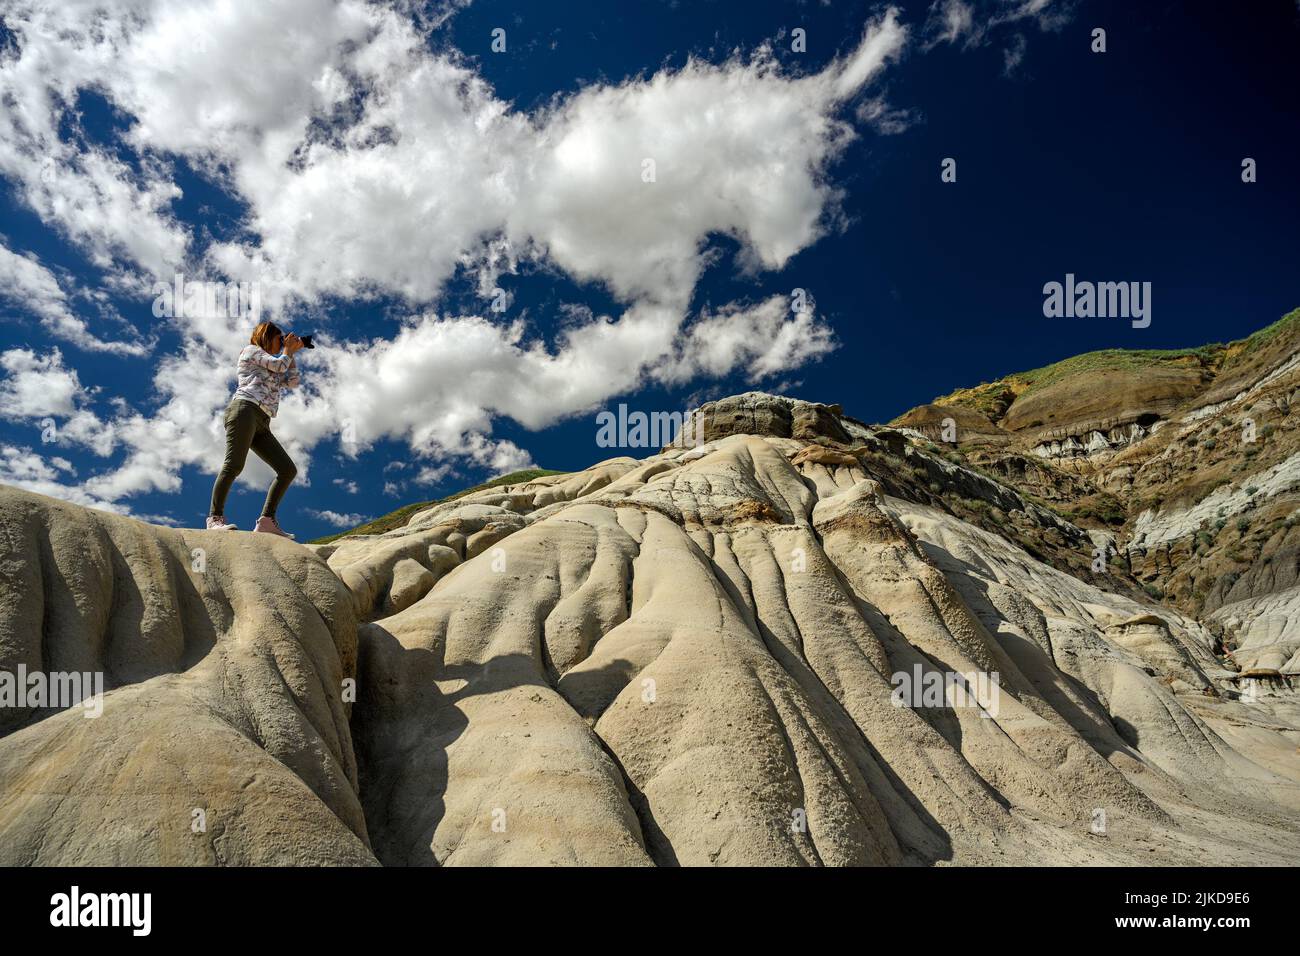 Tourist woman standing on a sandstone and photographing the Hoodoos and rock formations in the Canadian Badlands, Drumheller, Alberta, Canada. Stock Photo